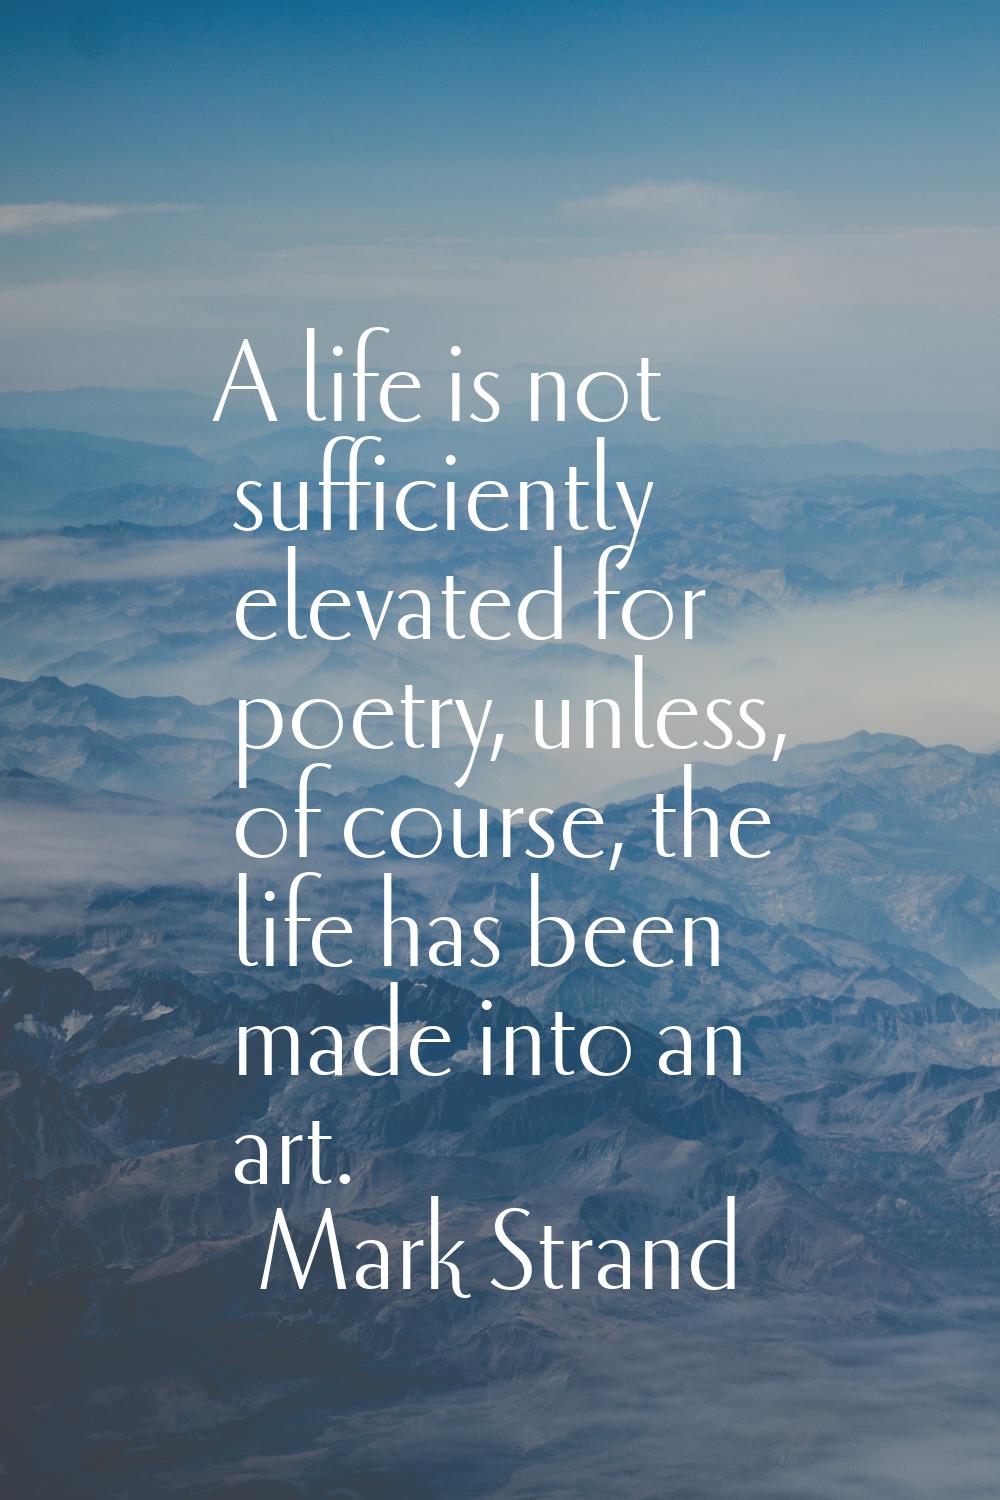 A life is not sufficiently elevated for poetry, unless, of course, the life has been made into an a